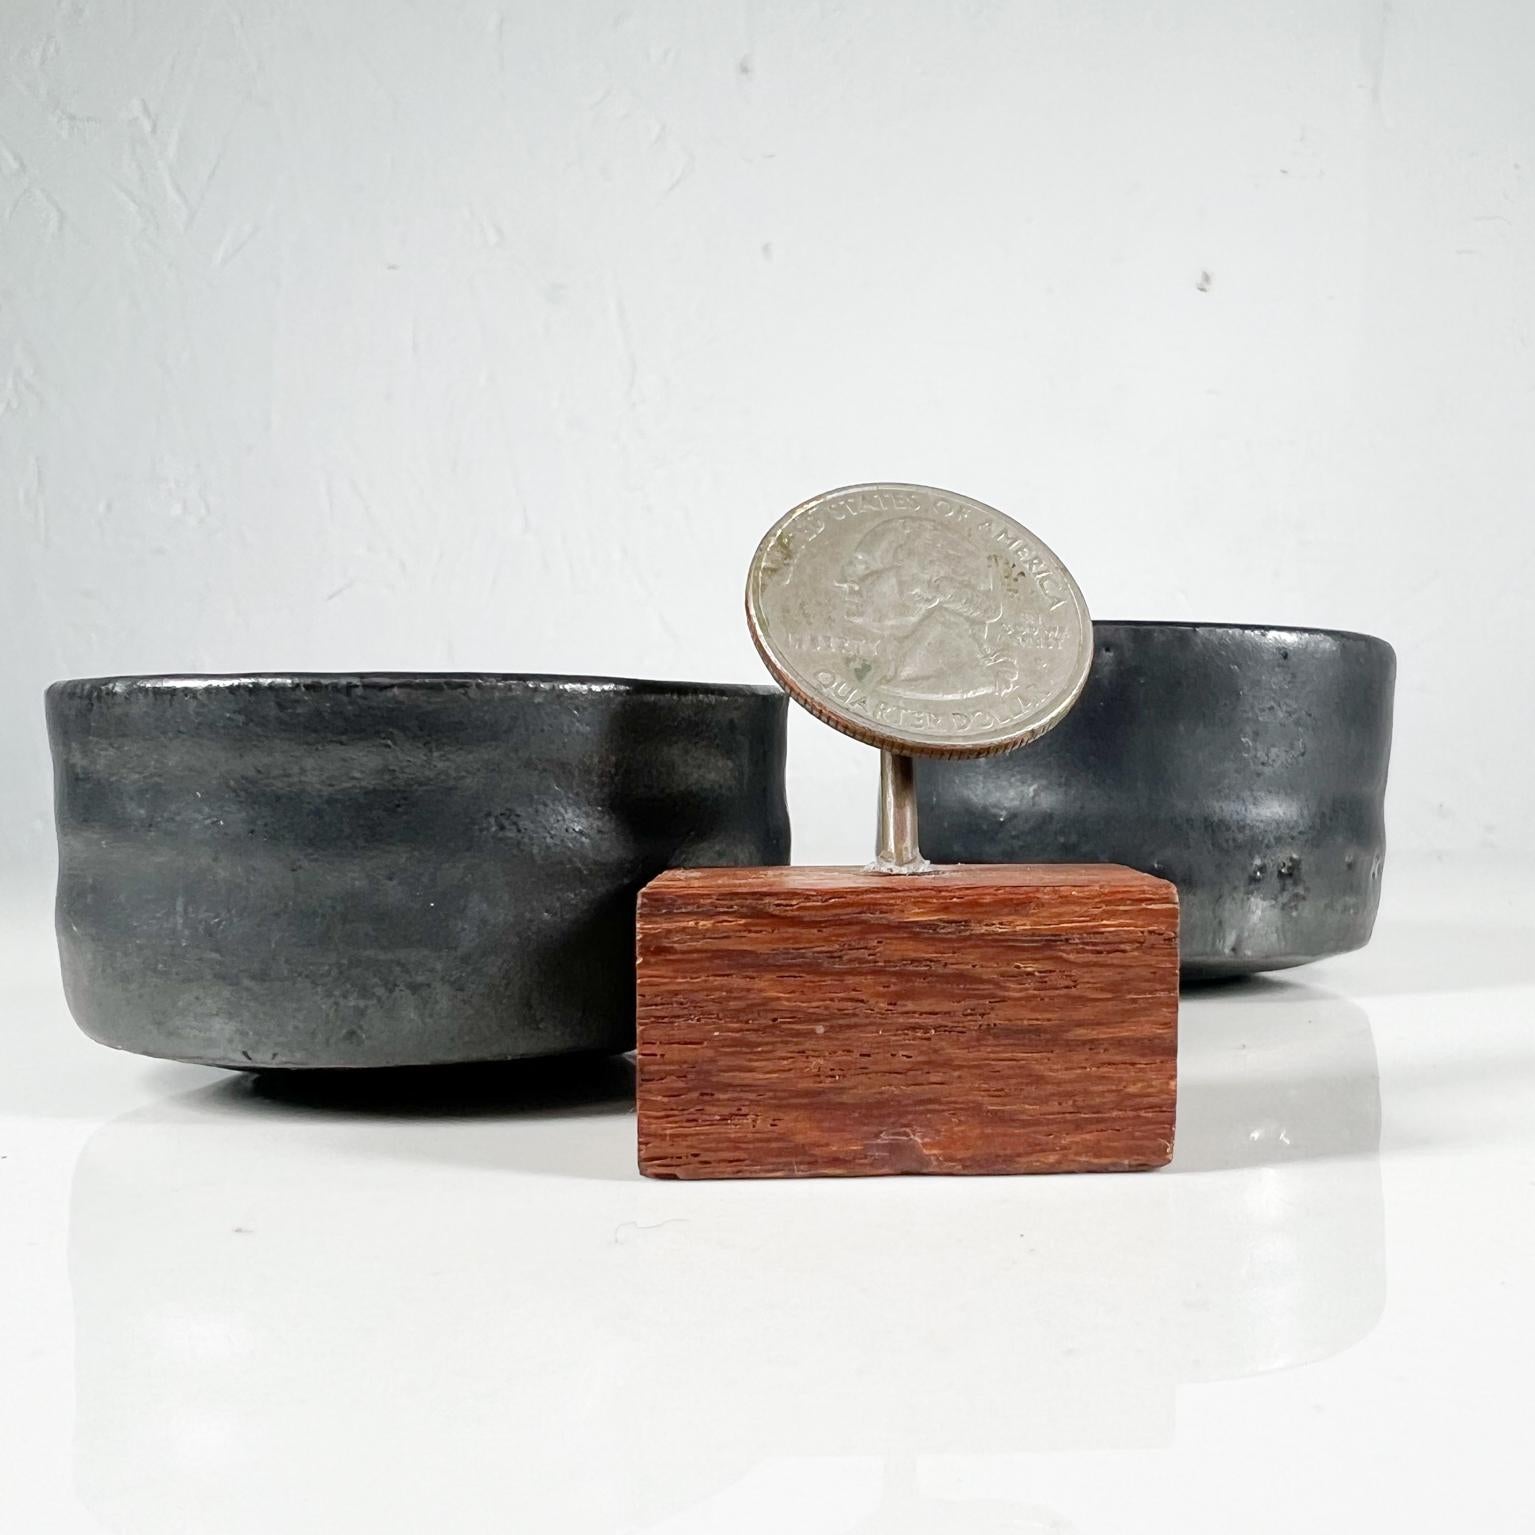 Modern Vintage Black Pottery Art Sculptural Mini Vases Dipping Bowls In Good Condition For Sale In Chula Vista, CA